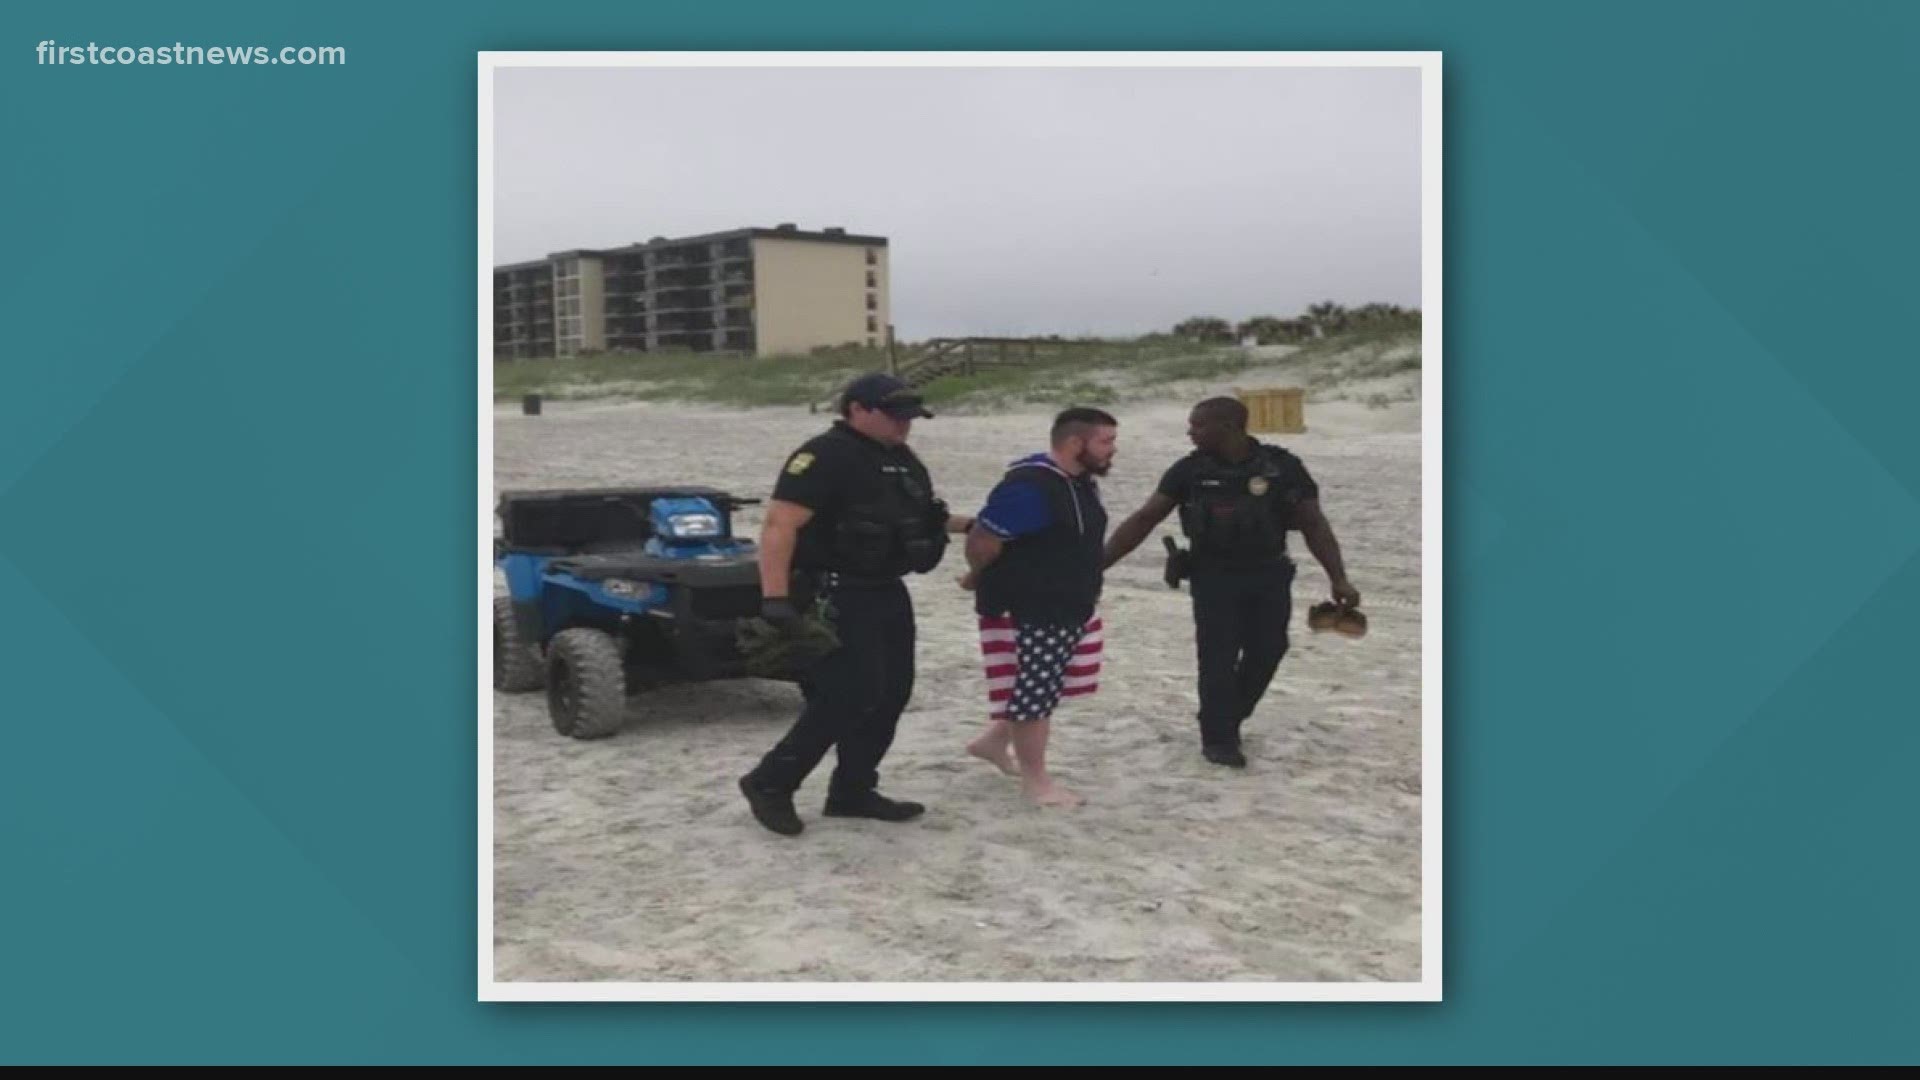 While monitoring the beach for compliance with current beach rules amid the COVID-19 pandemic, officers found Mario Gatti, 30, a wanted Pennsylvania fugitive.